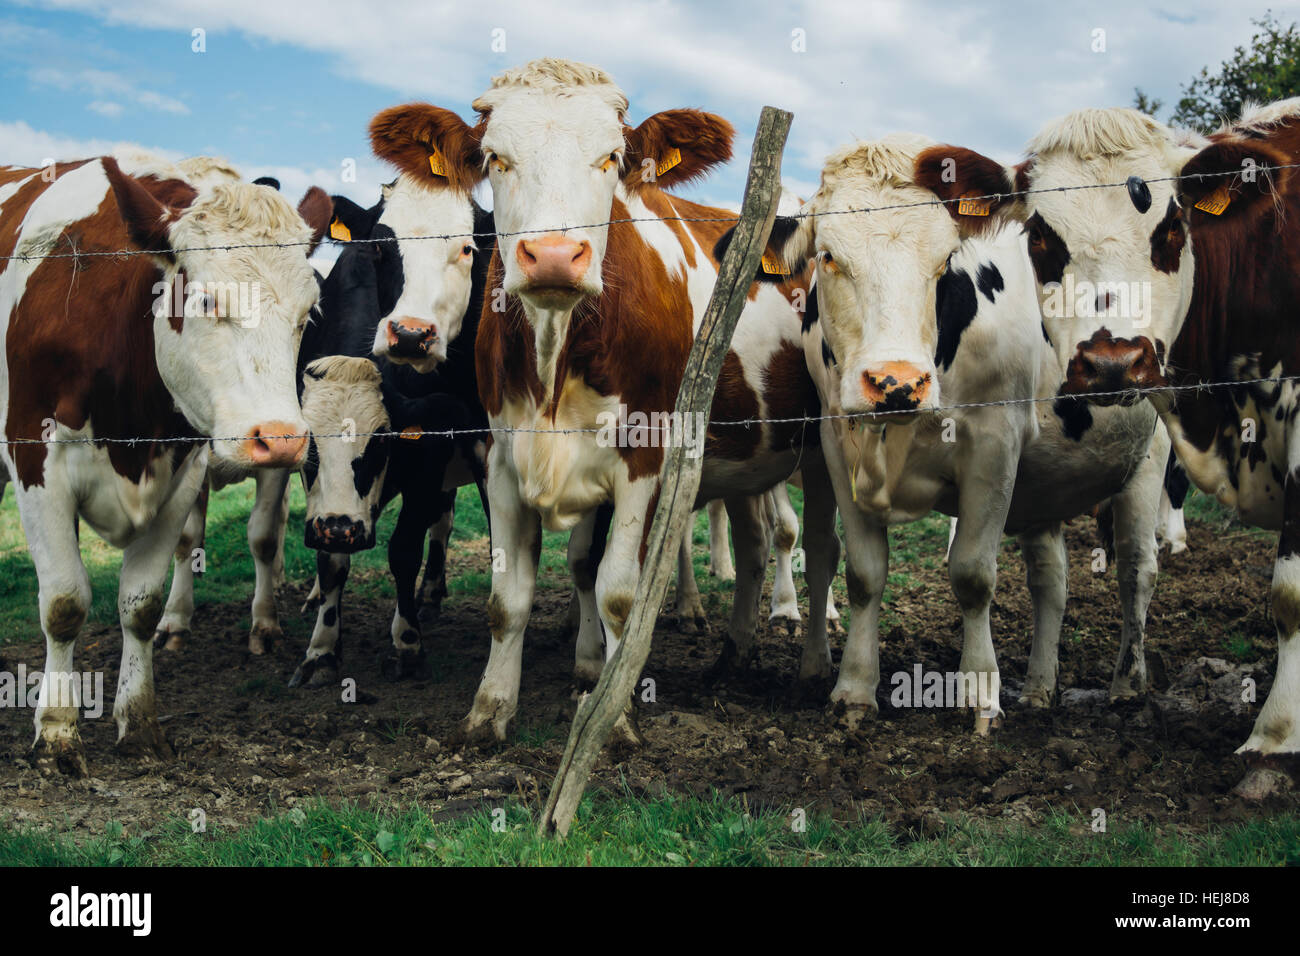 A curious cow herd with brown and white cows Stock Photo